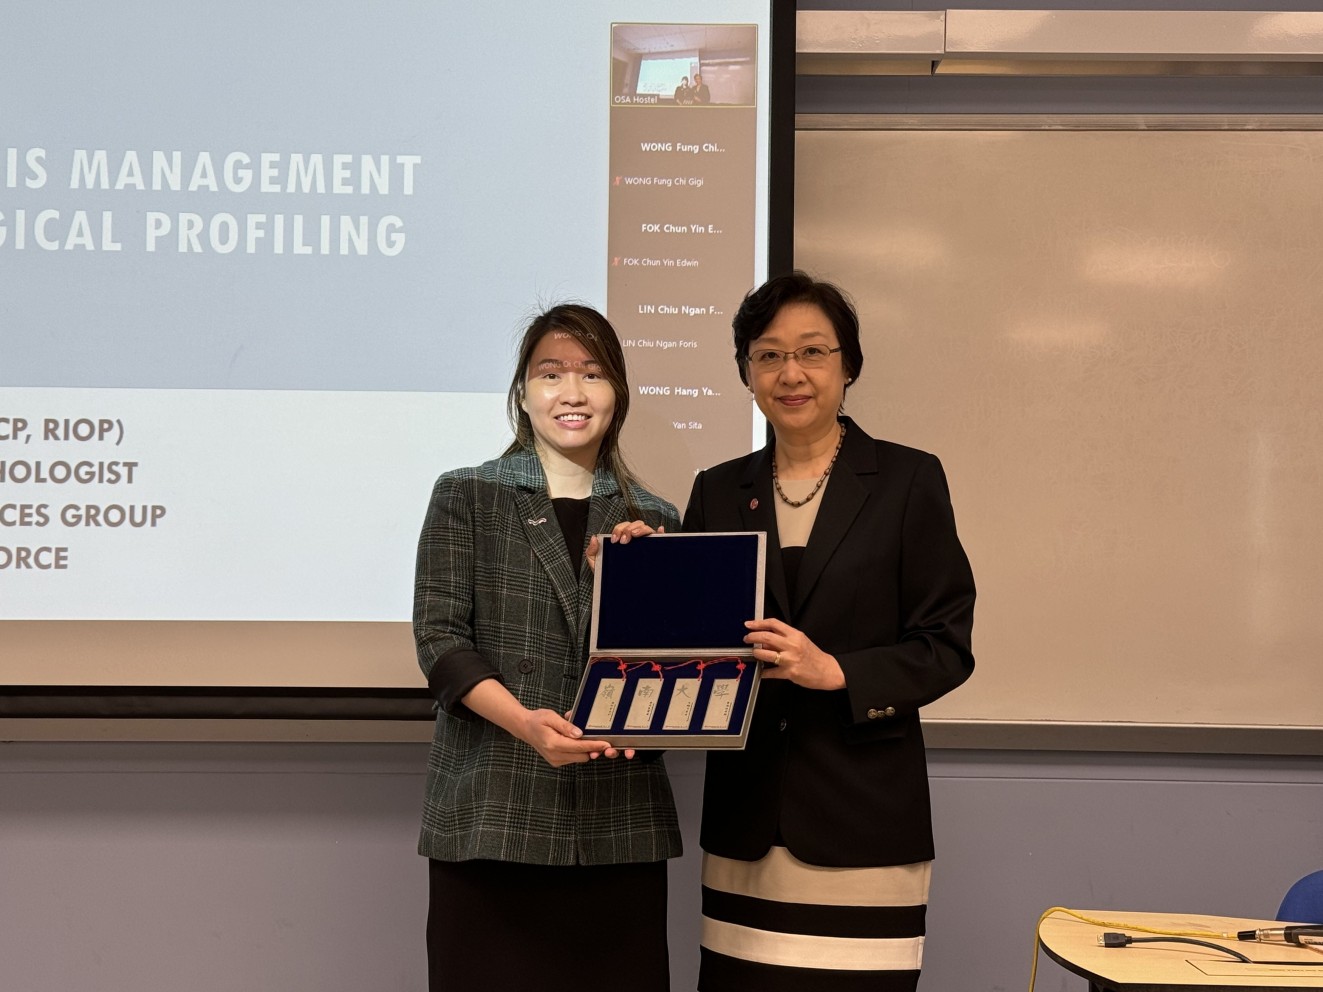 Prof Li Donghui (right), Associate Vice-President (Student Affairs) of Lingnan University, presents a souvenir to Dr Lau Wing-man, Clinical Psychologist of the Psychological Services Group of the Hong Kong Police Force.